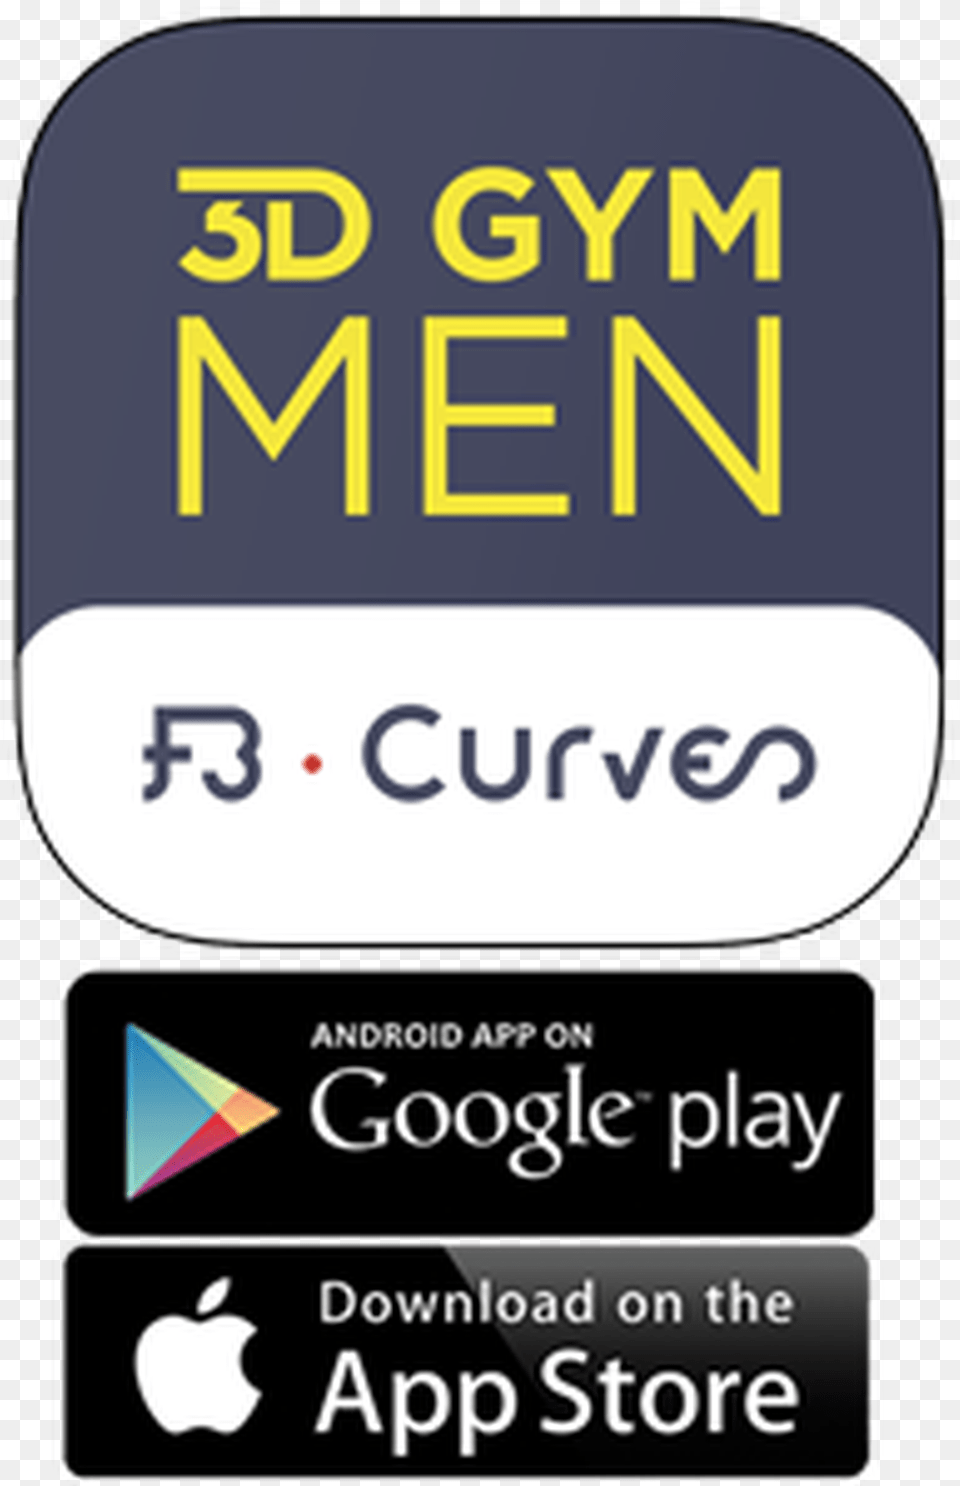 And Gymnastics Curves Curves Gym For Men Spare My Hair Scalp Solution Intense Concentrated, Advertisement, Poster, Electronics, Mobile Phone Png Image